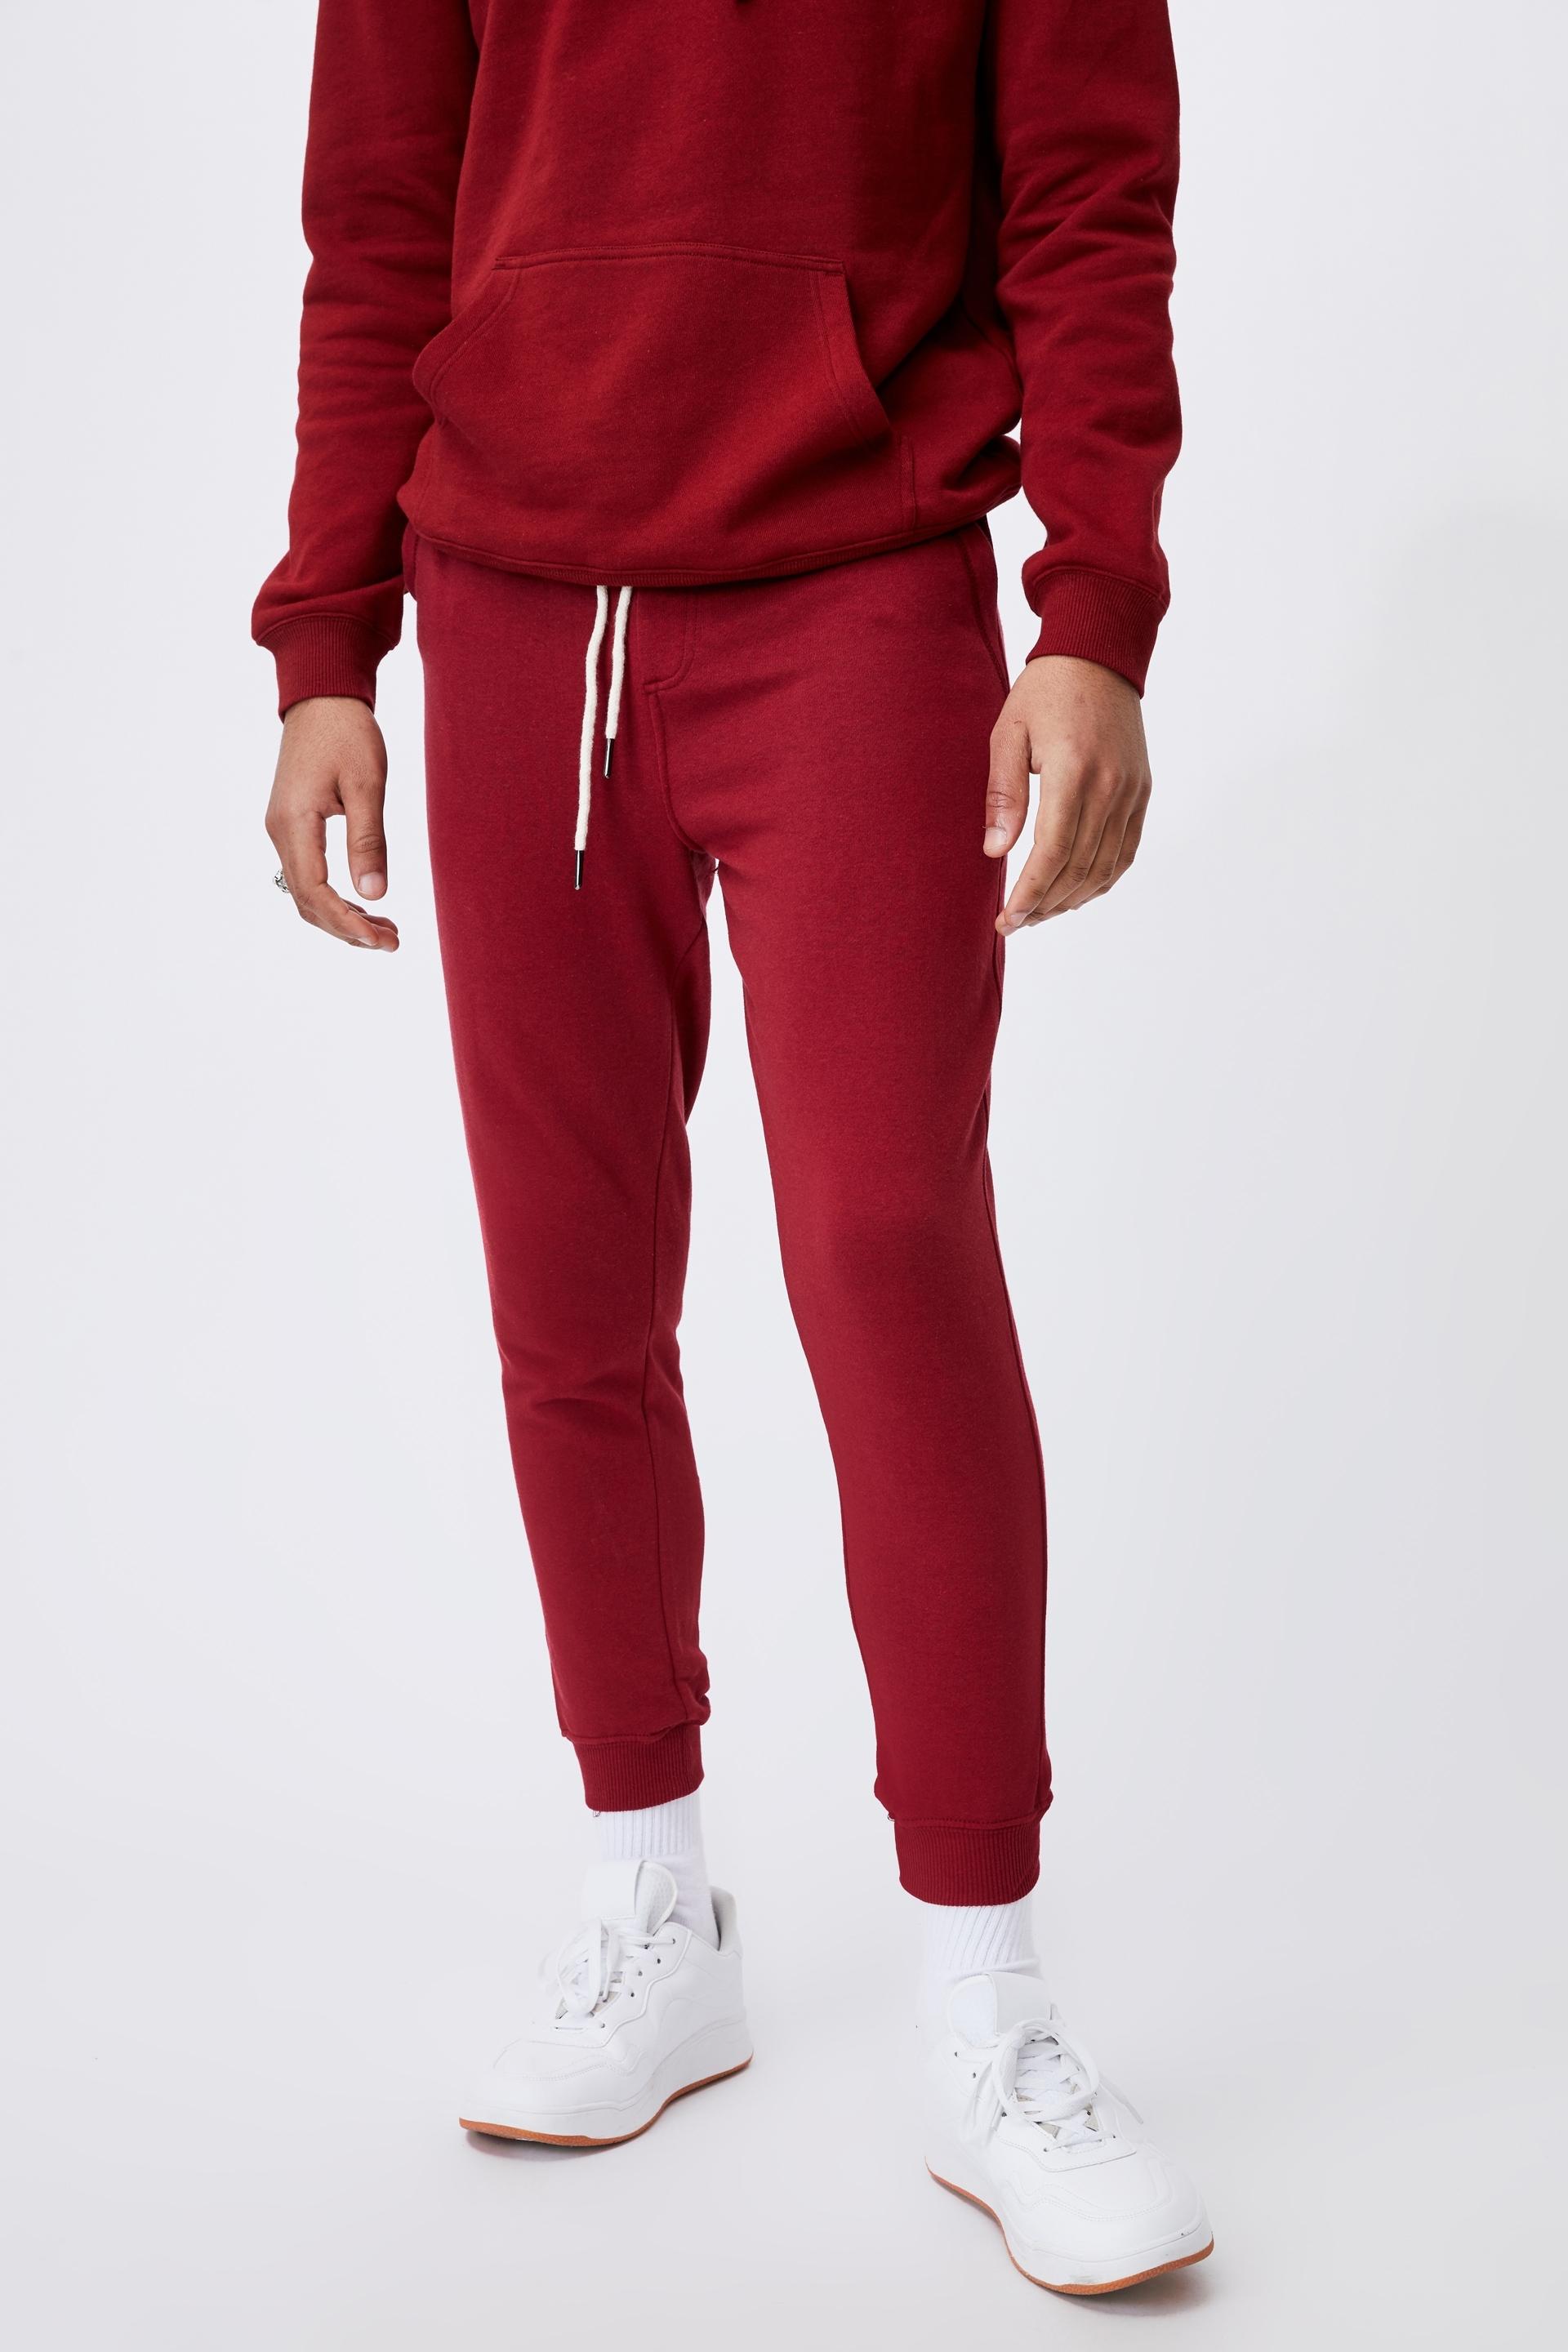 Trippy slim trackie - sundried red Cotton On Pants & Chinos ...